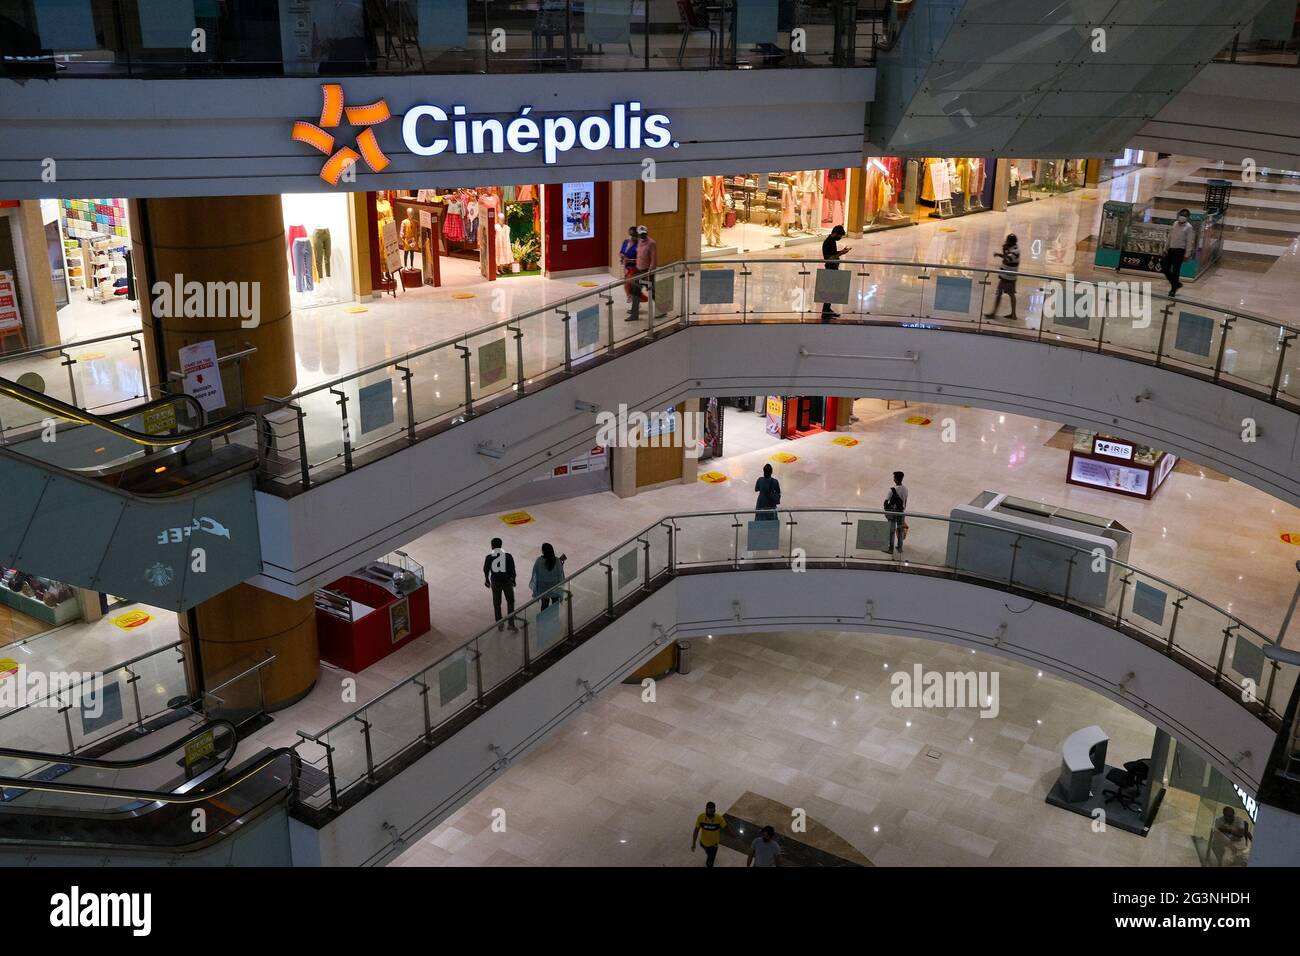 Malls on First Day After Reopening (Pictures) – 2:48AM